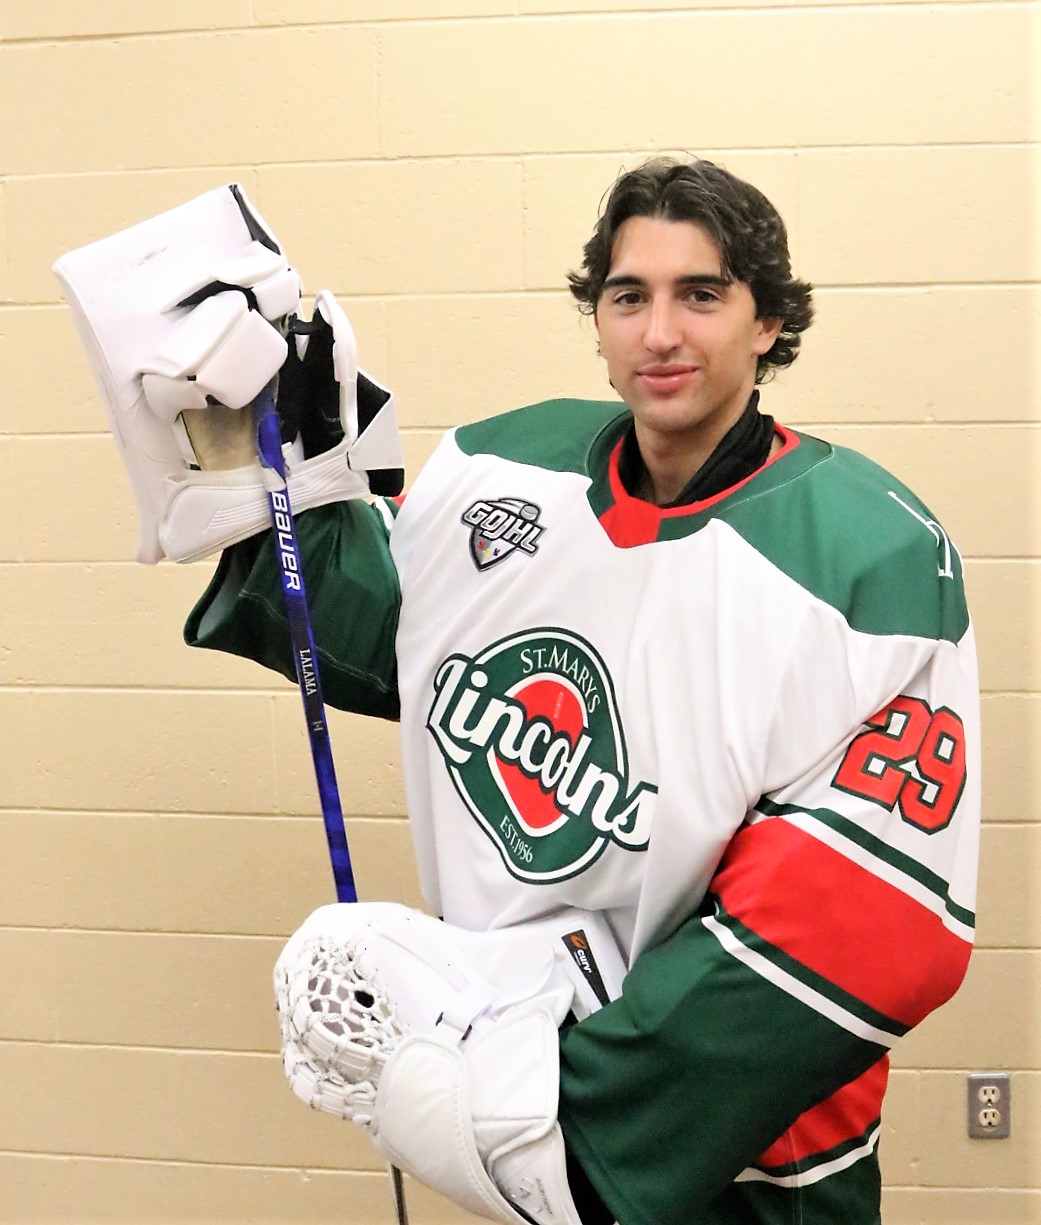 Lalama composed in net, gives Lincolns veteran goalie